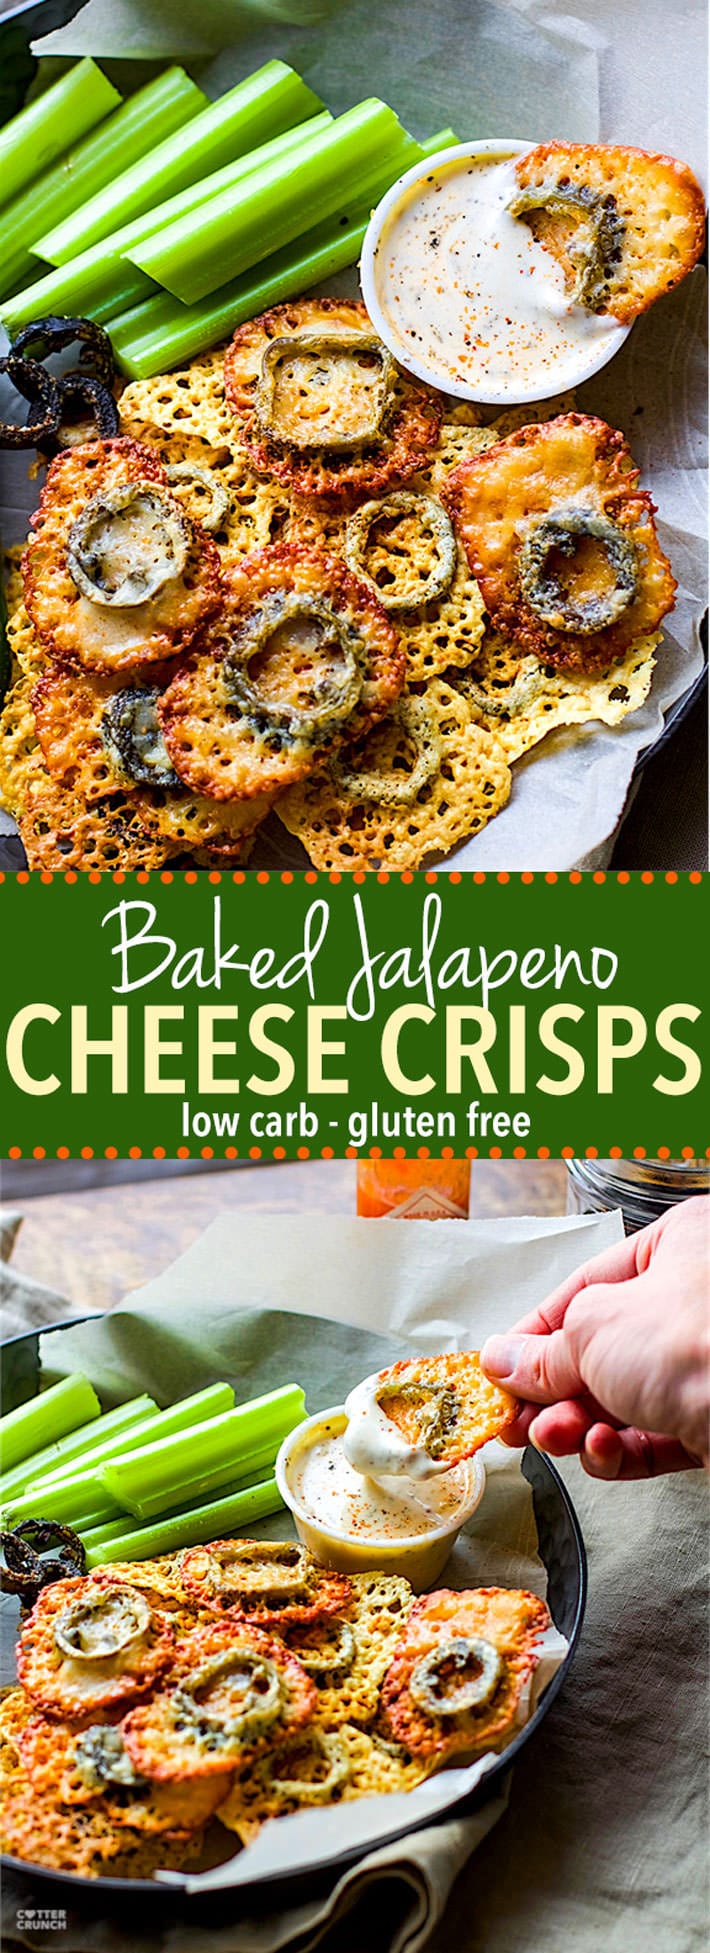 Easy Baked Jalapeno Cheese Crisps! Low carb gluten free cheese crisps with a tex mex flare! These healthier baked crisps are simple to make with minimal ingredients. Plus can be made mild or super spicy. You choose! One of our favorite appetizers and snacks. www.cottercrunch.com